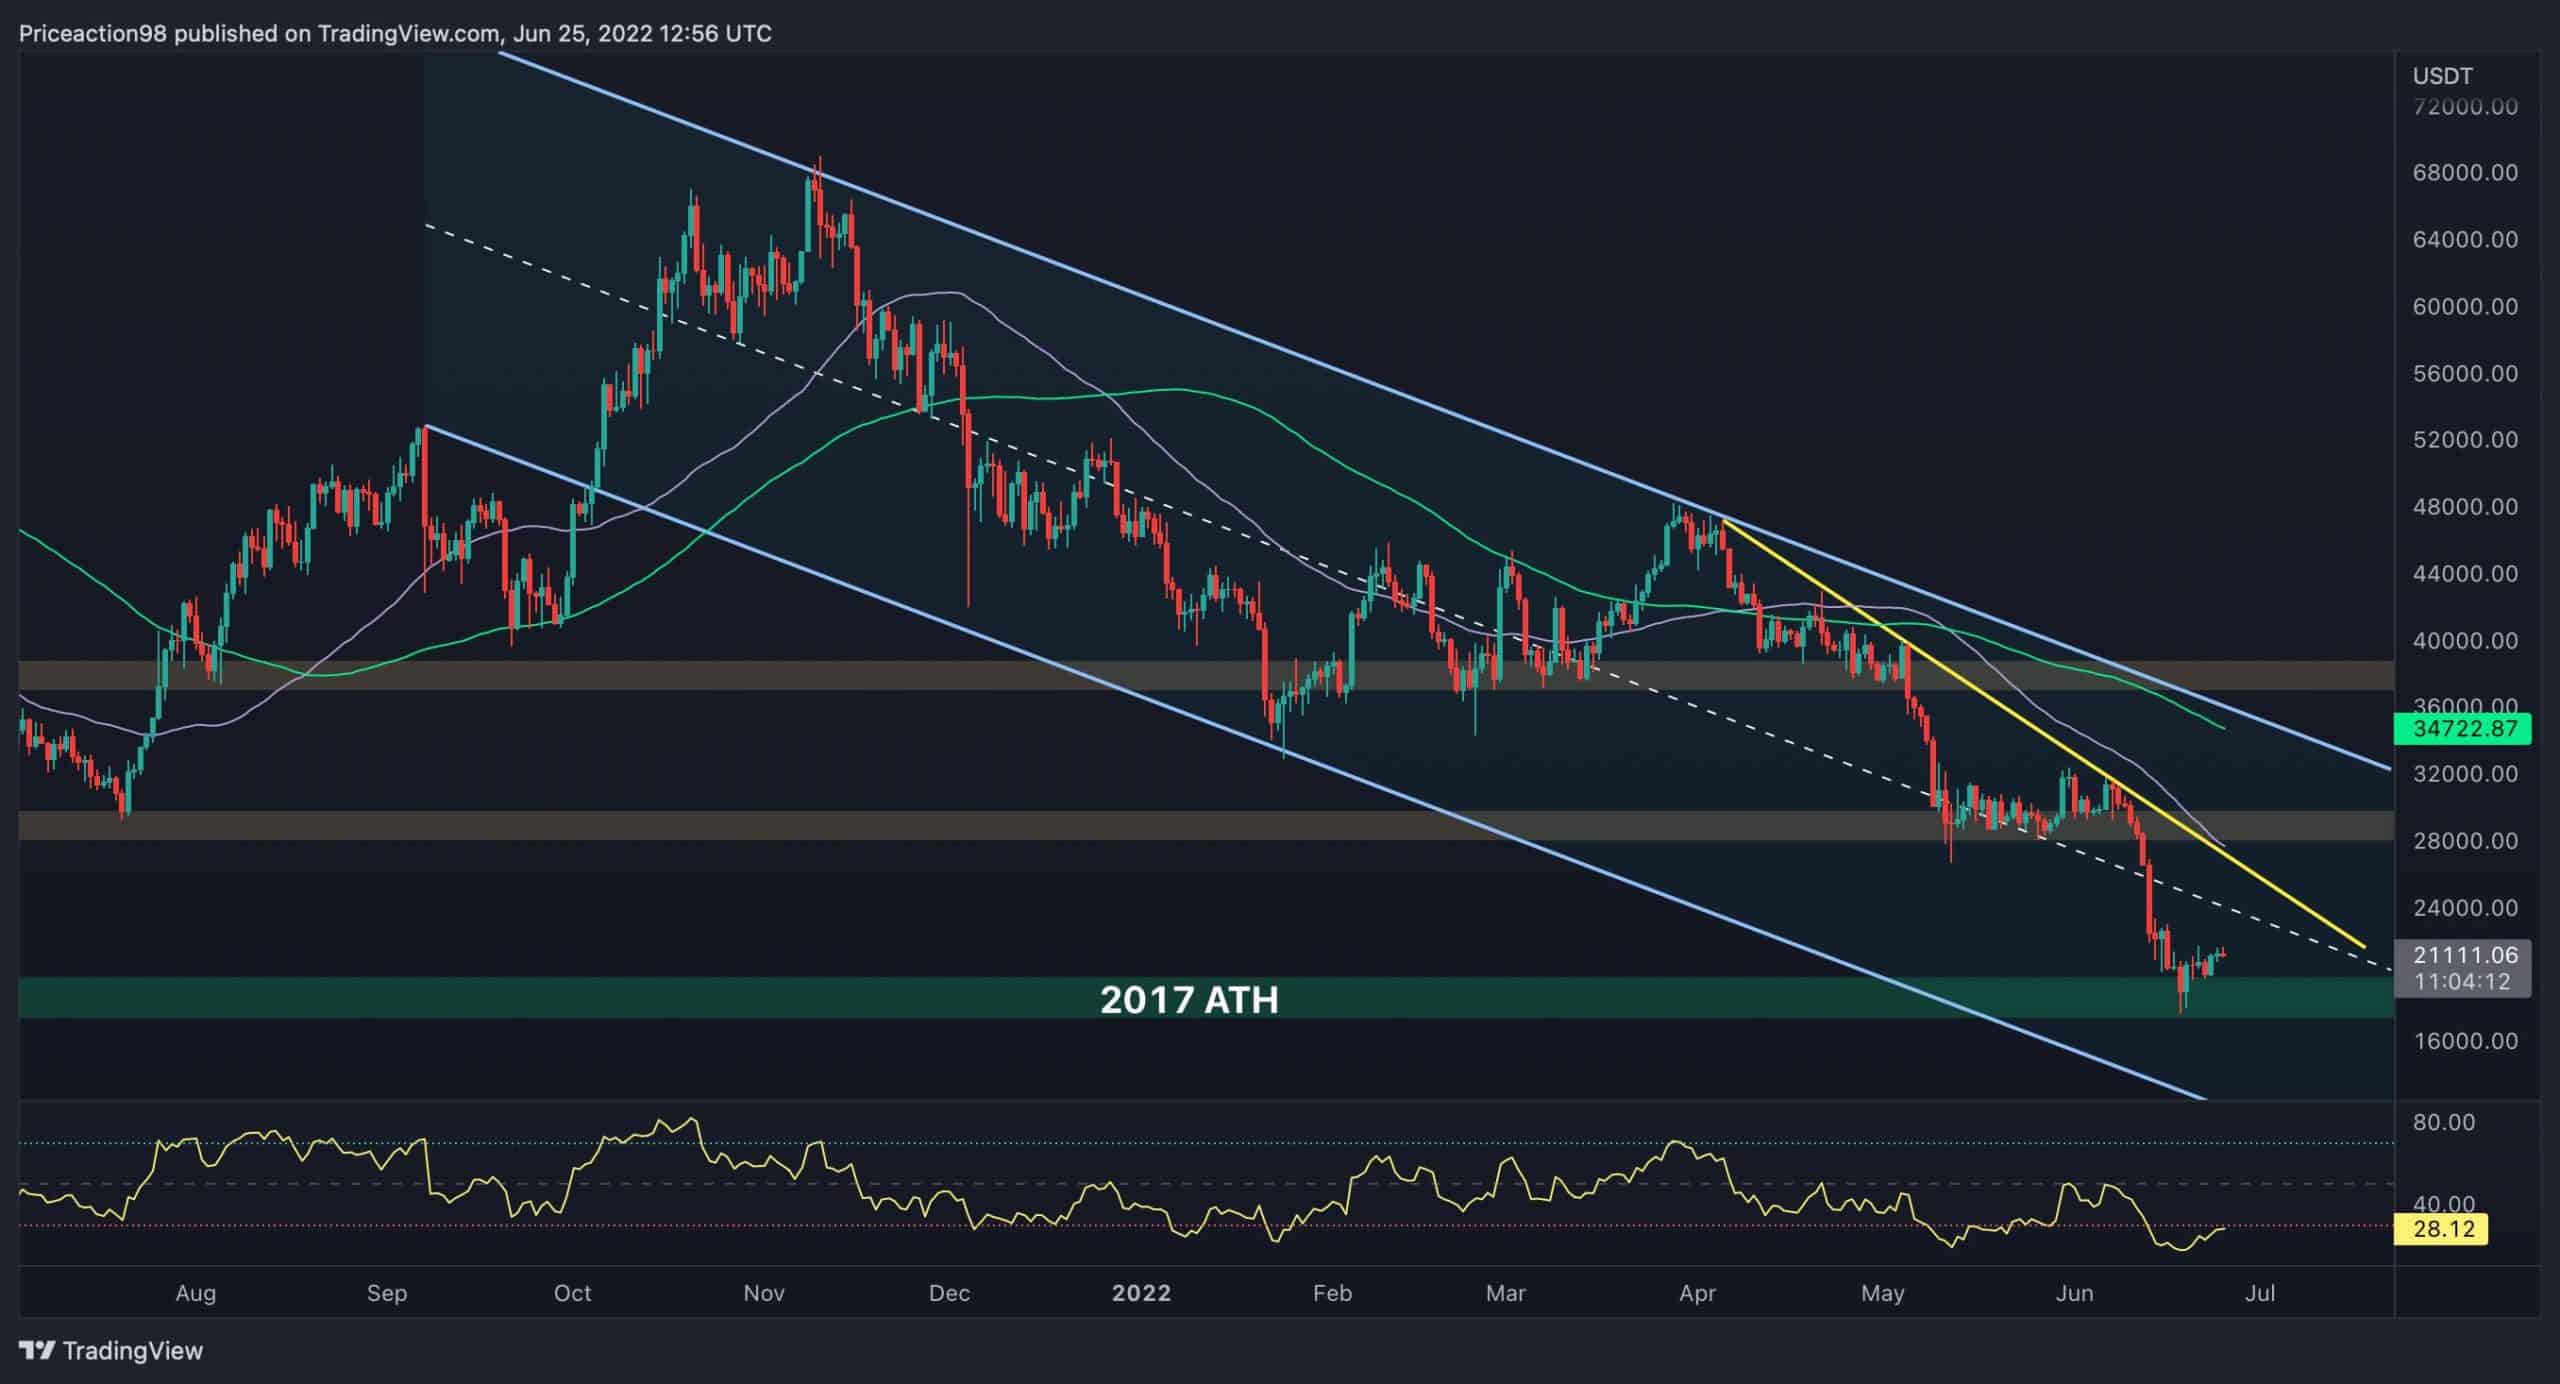 BTC Fights With $21K But is Another Drop Coming? (Bitcoin Price Analysis)